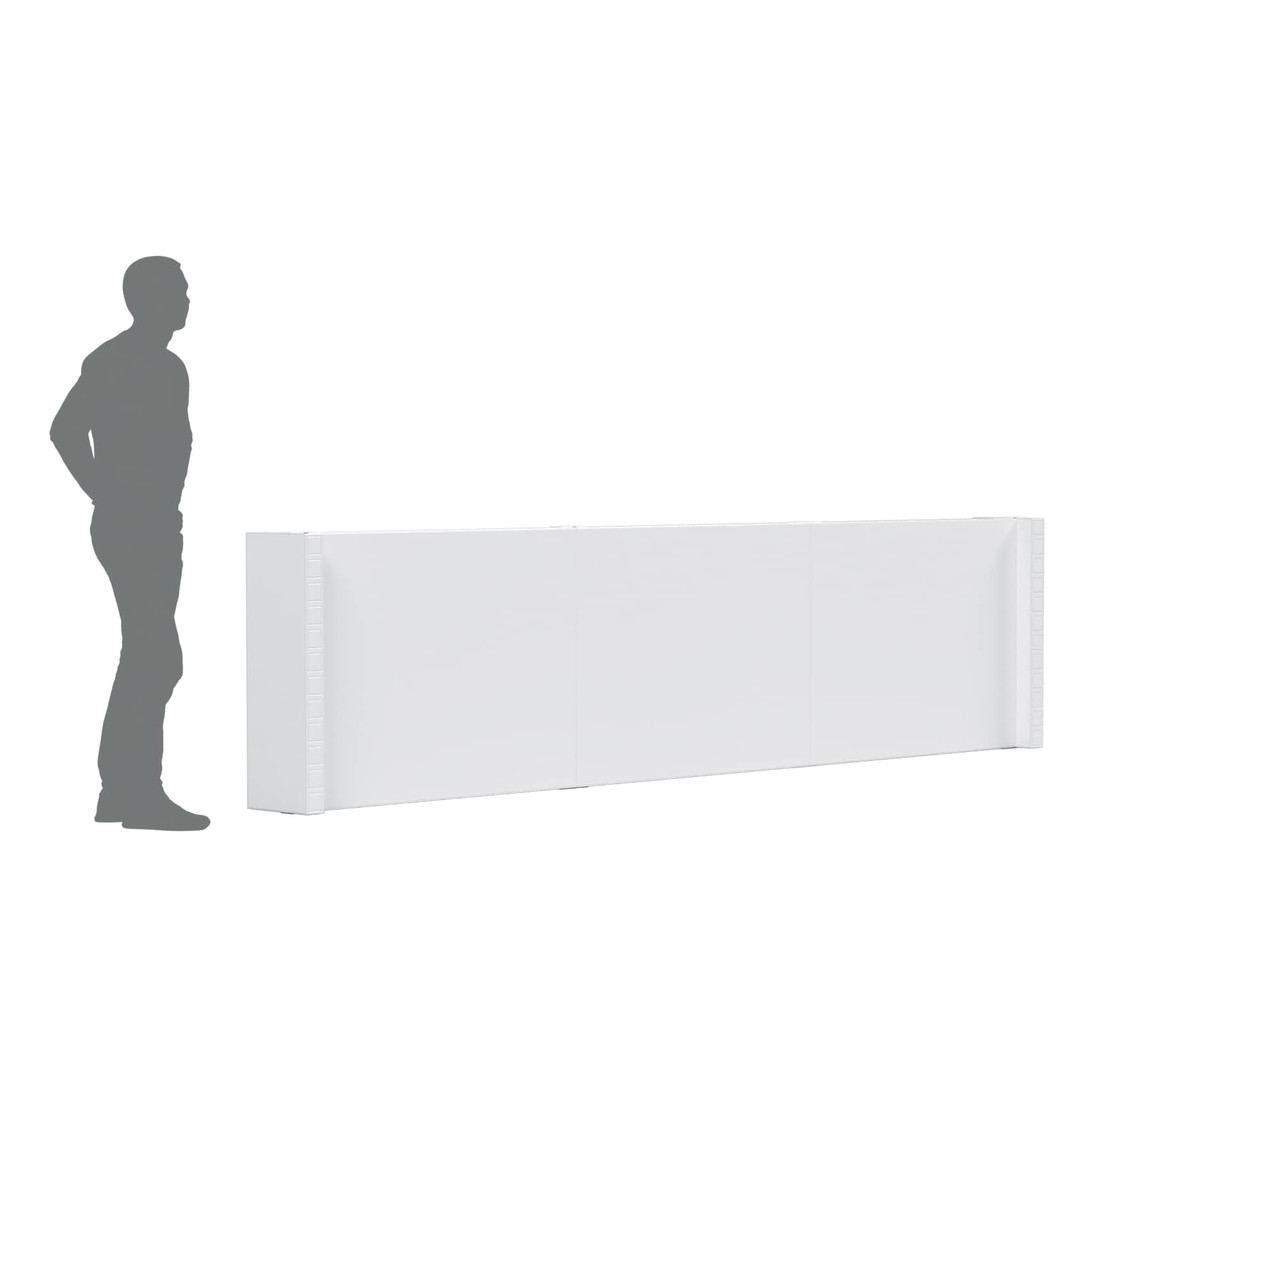 The EverPanel Pony Wall Kit is a great solution for controlling the flow of pedestrian traffic.